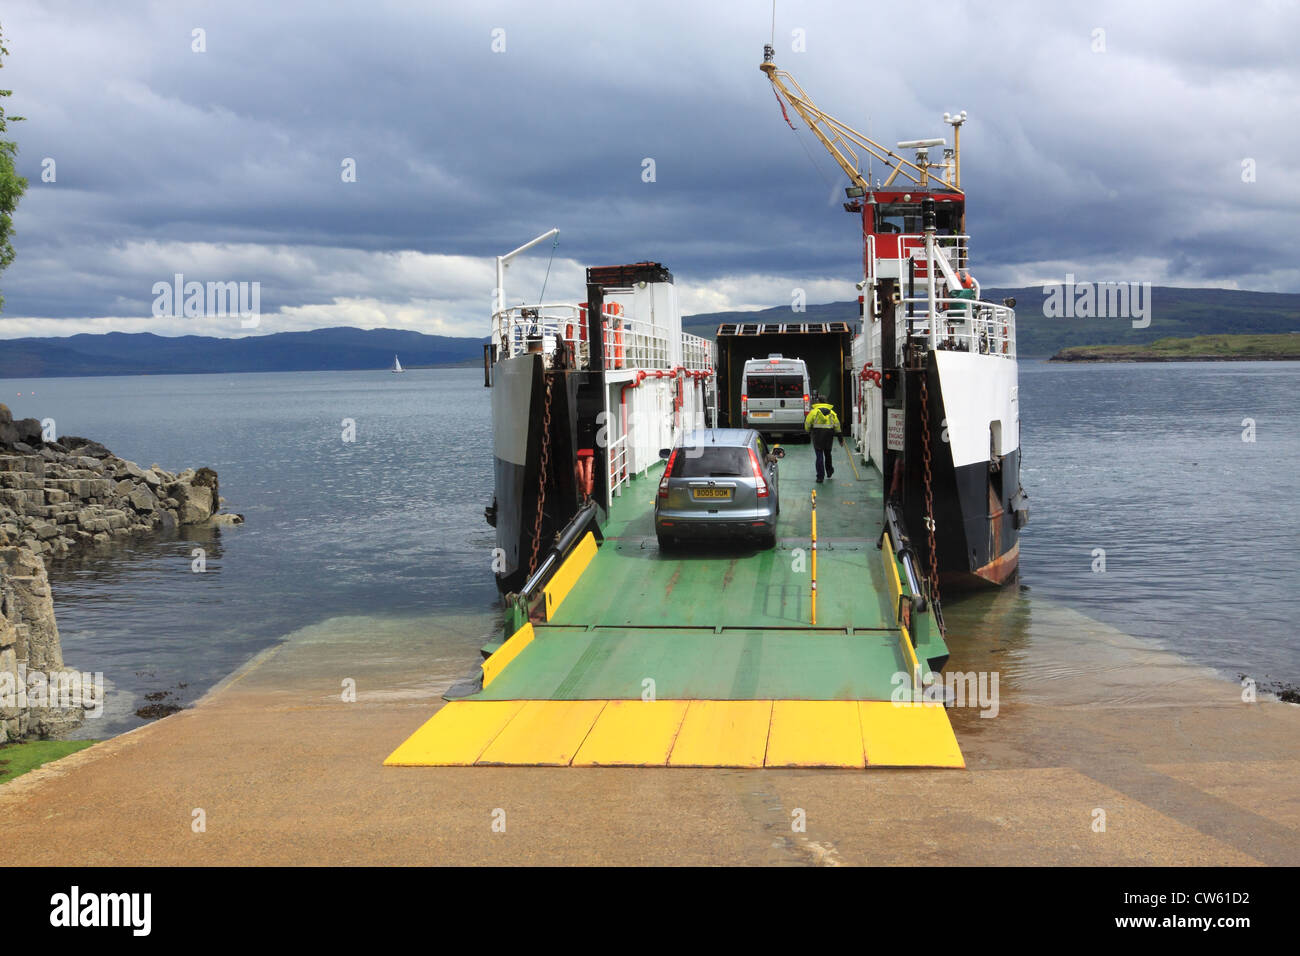 Vehicles boarding the small ferry at Tobermory, Isle of Mull, bound for Kilchoan, Scotland Stock Photo